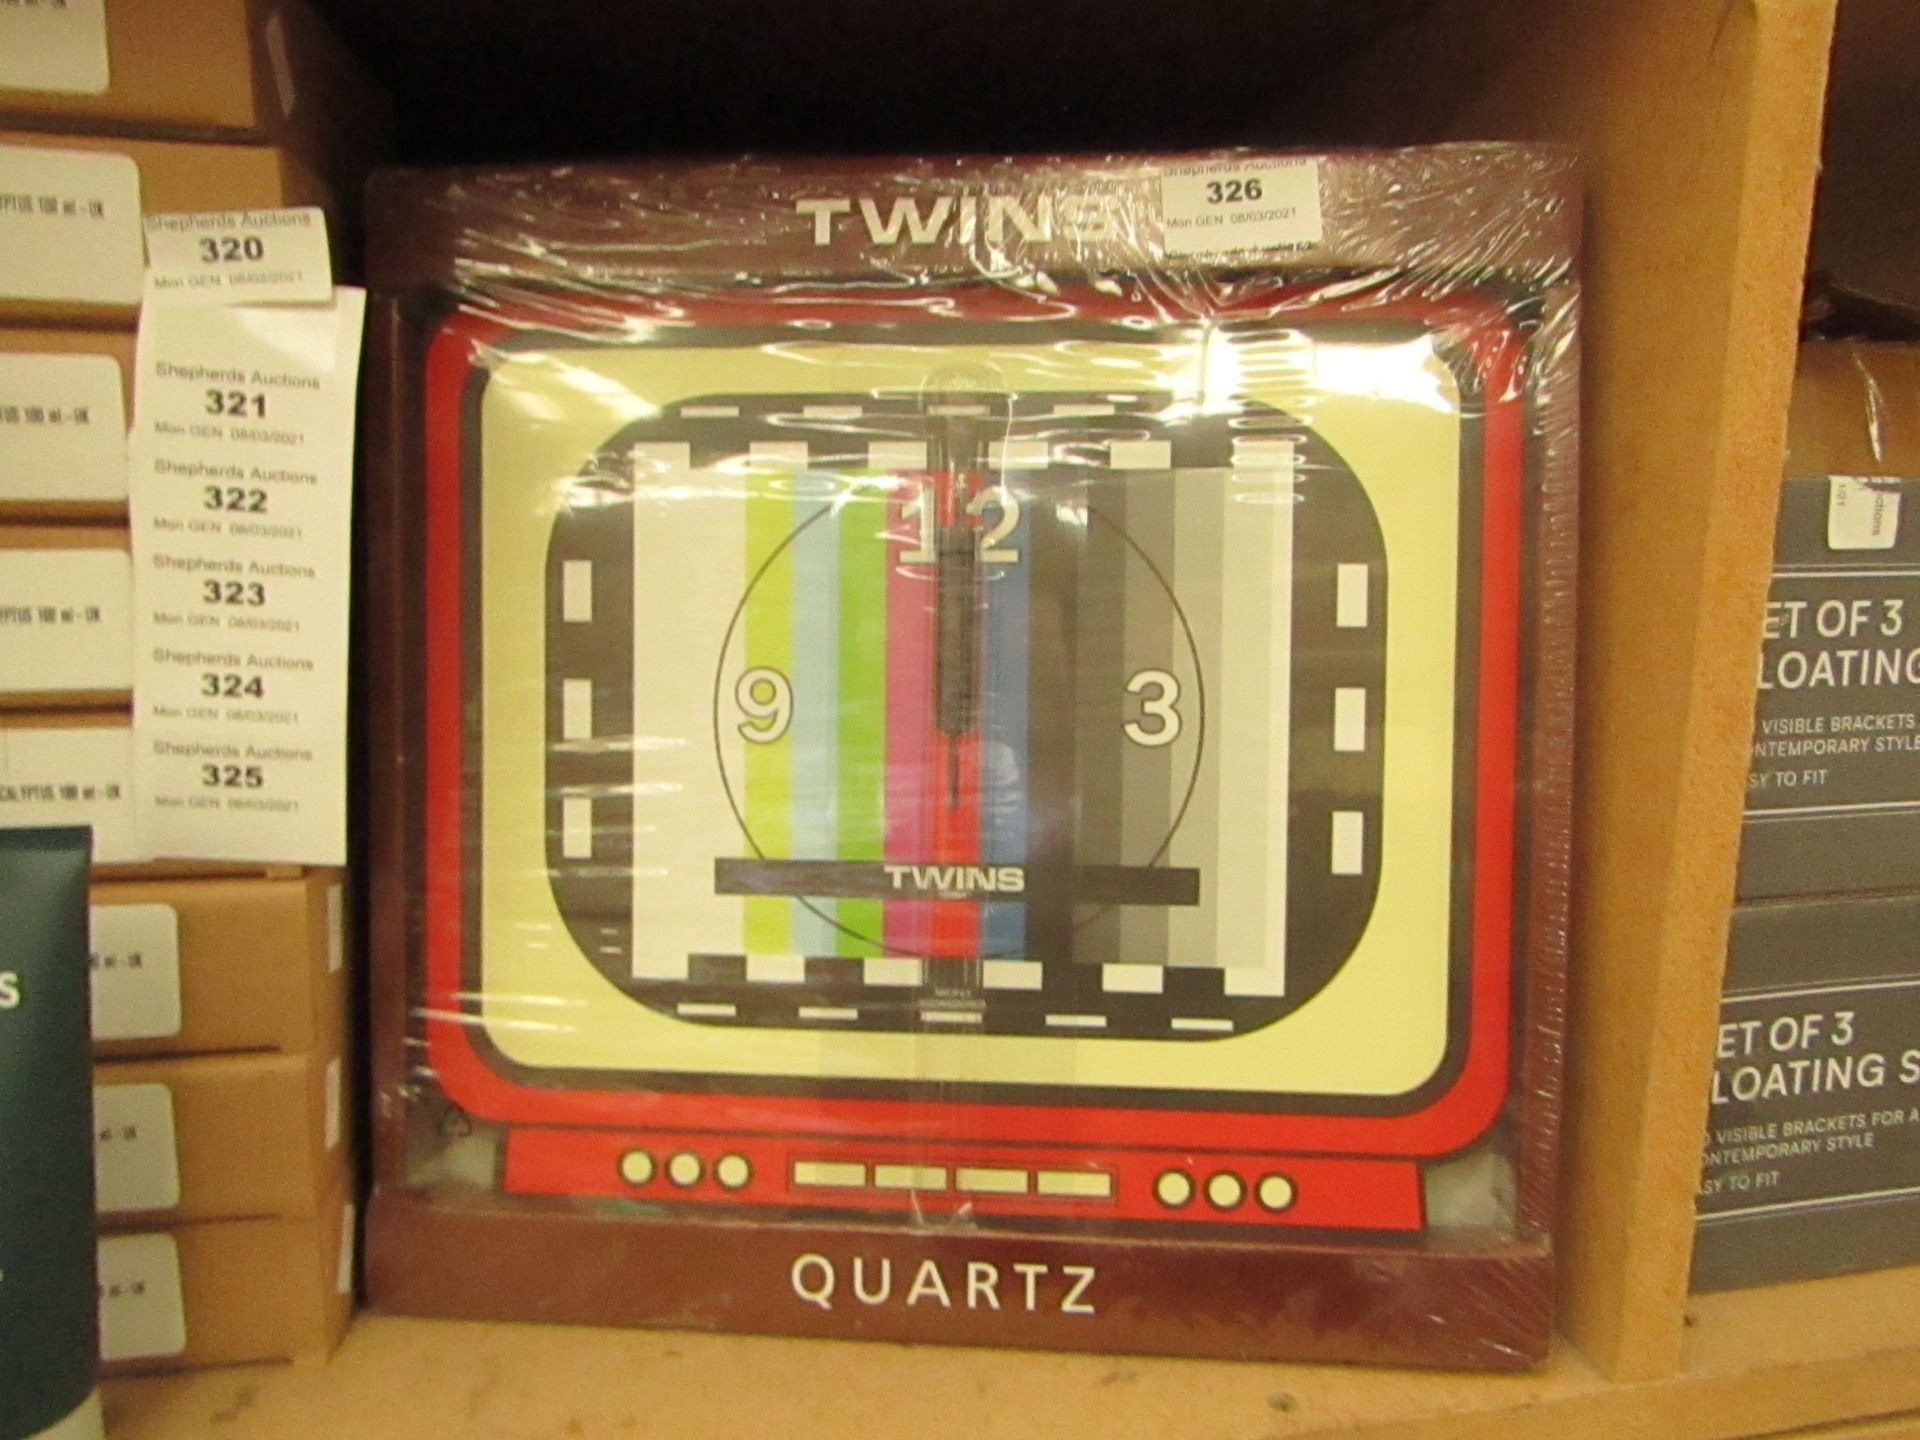 Twins - Tv Interference Inspired Clock - Unused & Packaged.